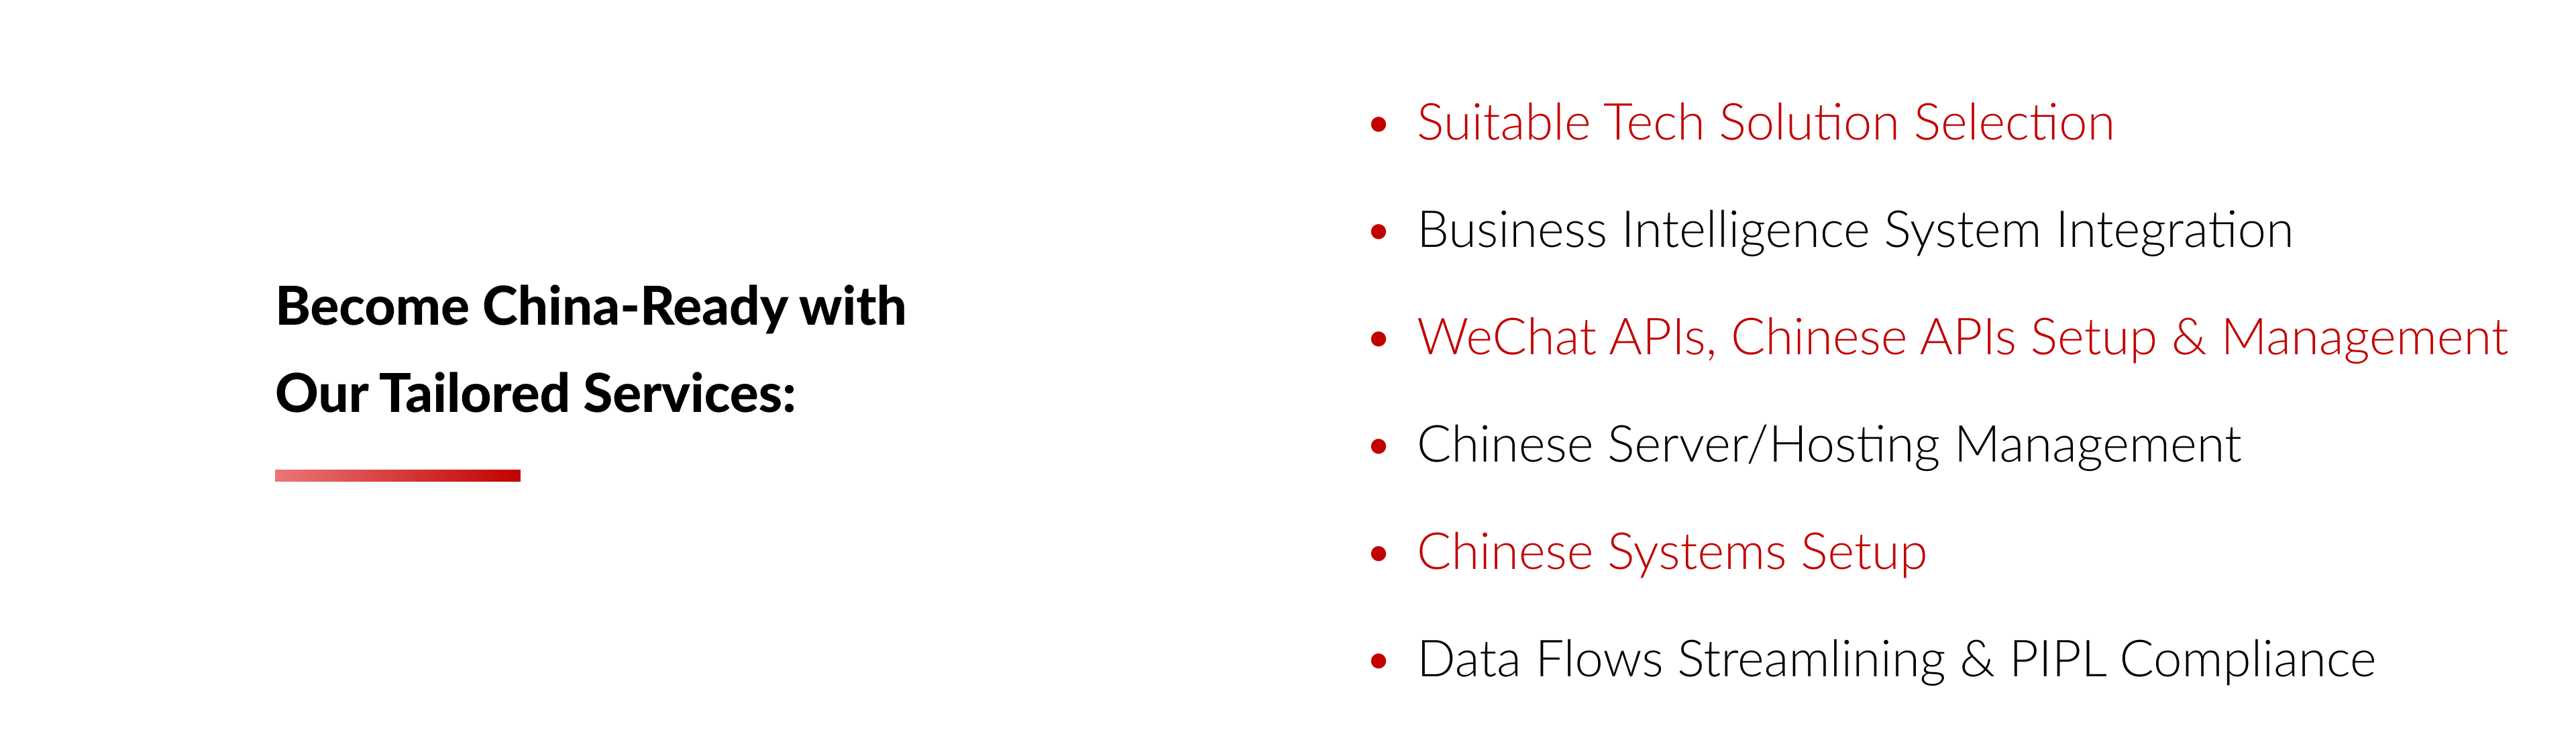 ITC can help you become China-ready with our tailored digital transformation services, including suitable tech solution selection, business intelligence system integration, WeChat APIs, Chinese APIs, Setup & Management, Chinese Server/Hosting Management, Chinese Systems Setup, and Data Floes Streamlining & PIPL Compliance